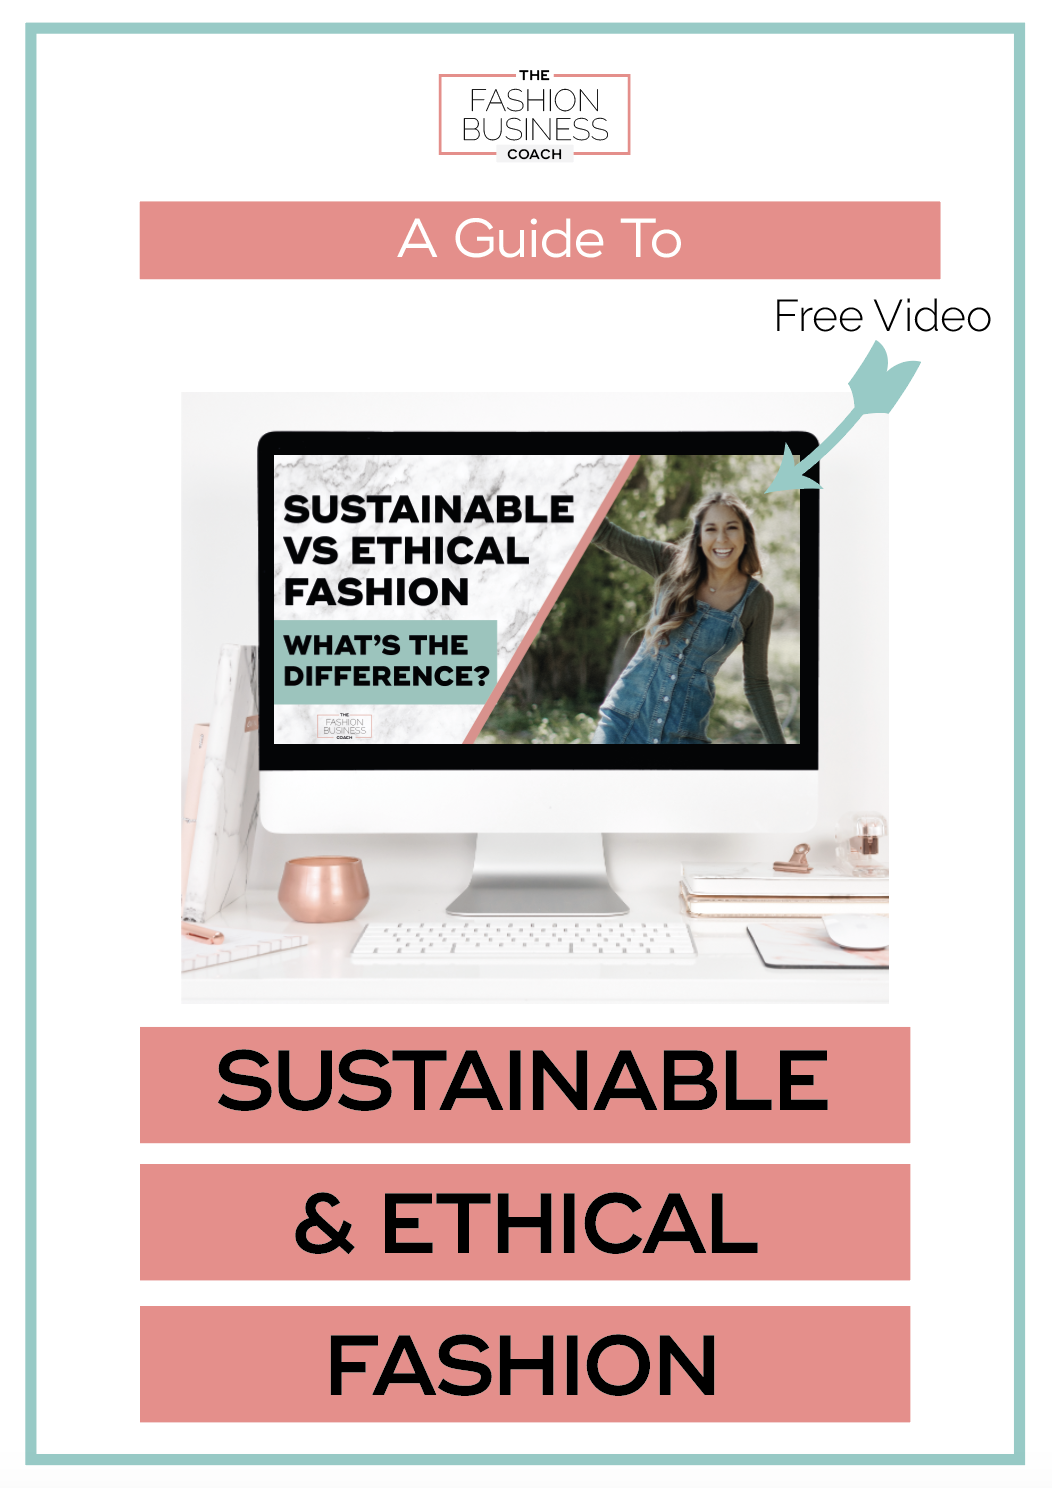 A Guide To Sustainable & Ethical Fashion 3.png